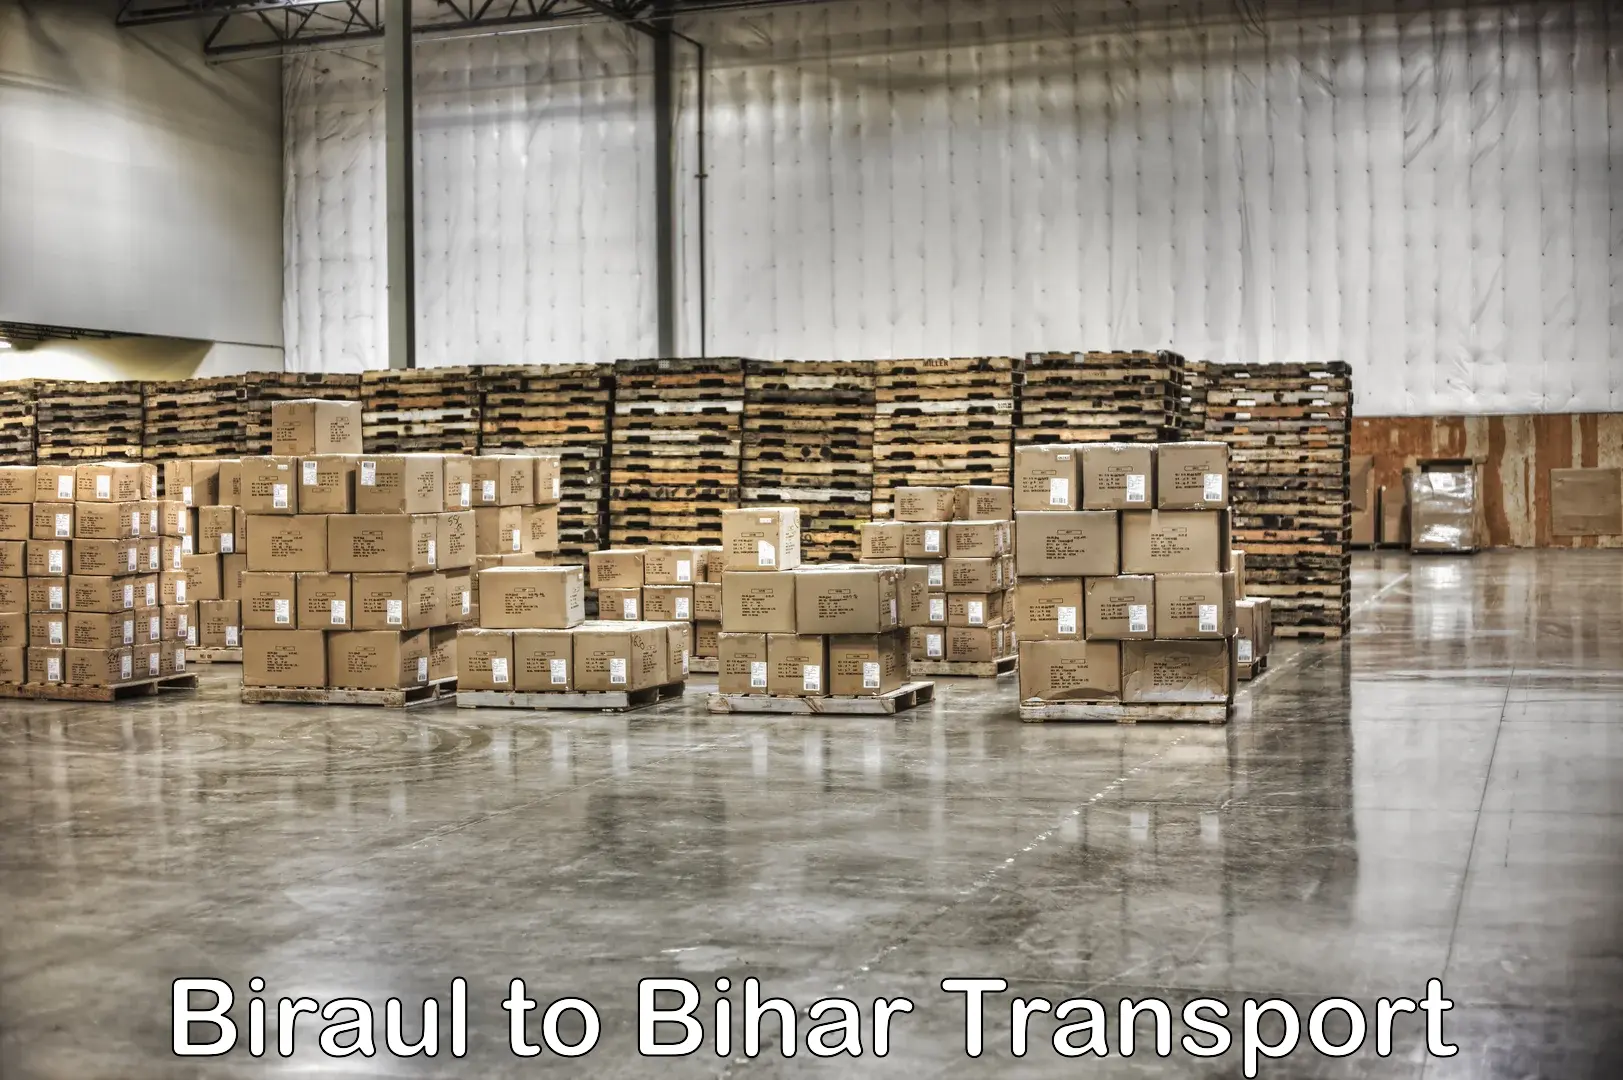 Domestic goods transportation services Biraul to Dhaka